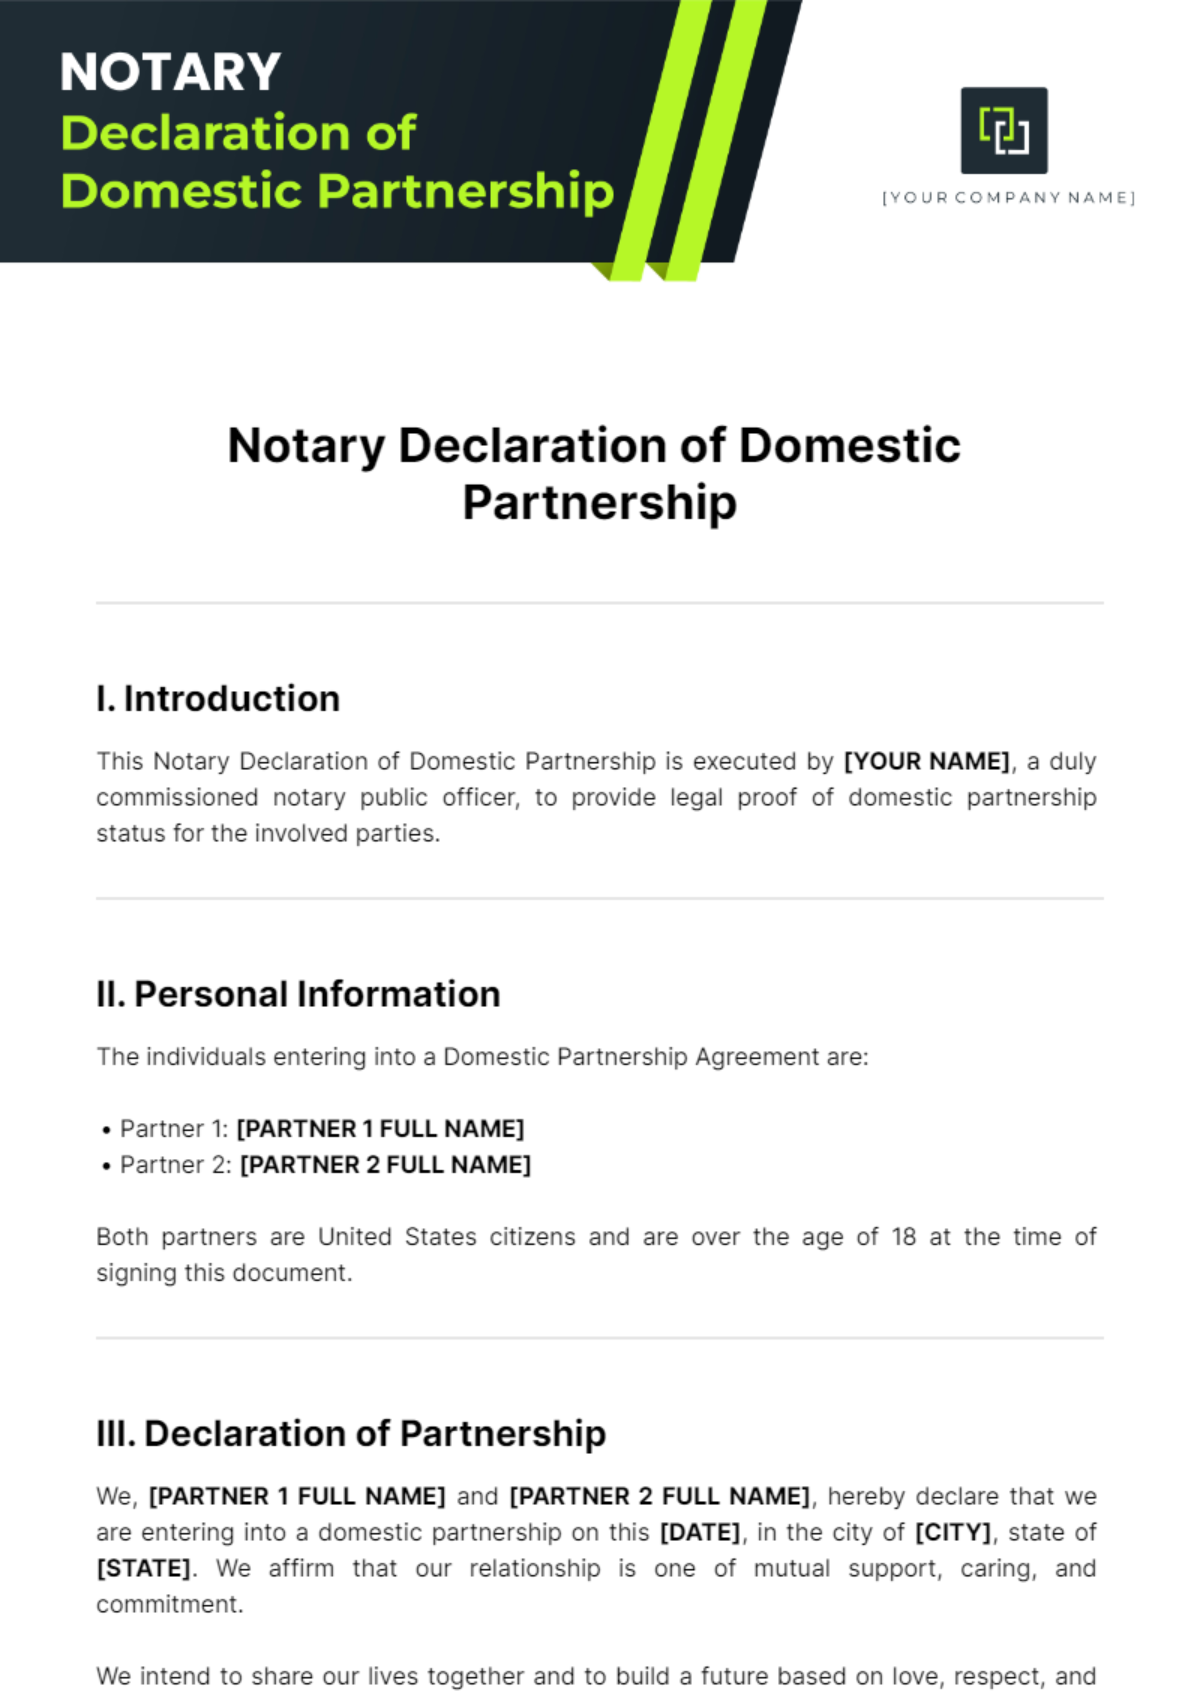 Notary Declaration Of Domestic Partnership Template